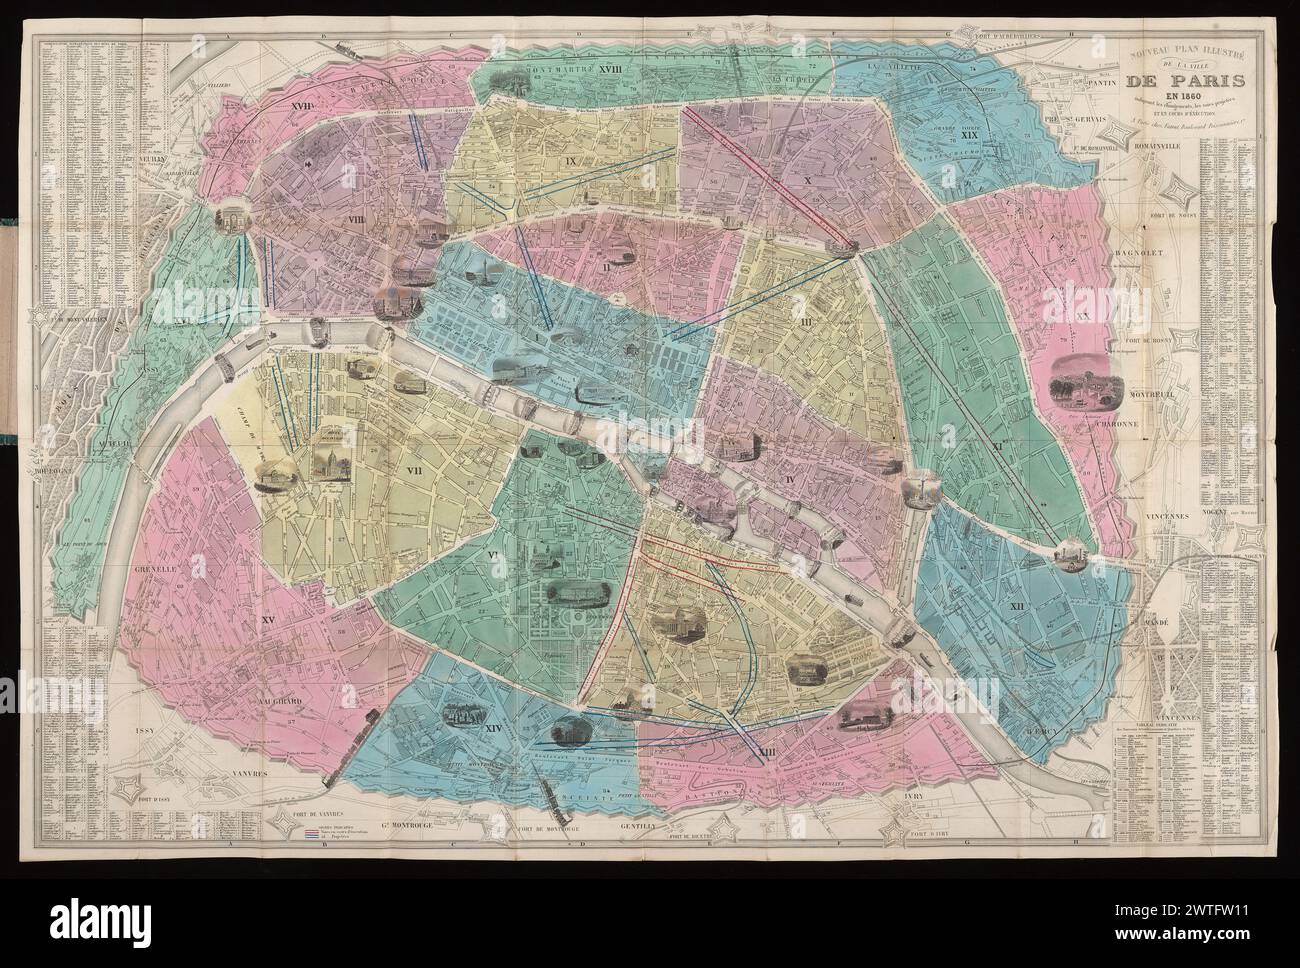 Nouveau plan illustré de la ville de Paris en 1860 : indiquant les changements, les voies projetées et en cours d'éxécution, 1860. [1860] Scale not given. Includes index of streets. Views of Important buildings etc. appear at their site on the plan. The 20 arrondissements are hand colored. Thoroughfares under construction are indicated in red, those projected in blue. Folded plan mounted on p. [3] of pasteboard cover. Etching on p. [1] of cover with Fatout's address and view of Arc de Triomphe. Faint former owner's stamp in blue ink on verso: Léon [Brault?] ... 18, Paris. Indexed by: Vallée, L Stock Photo